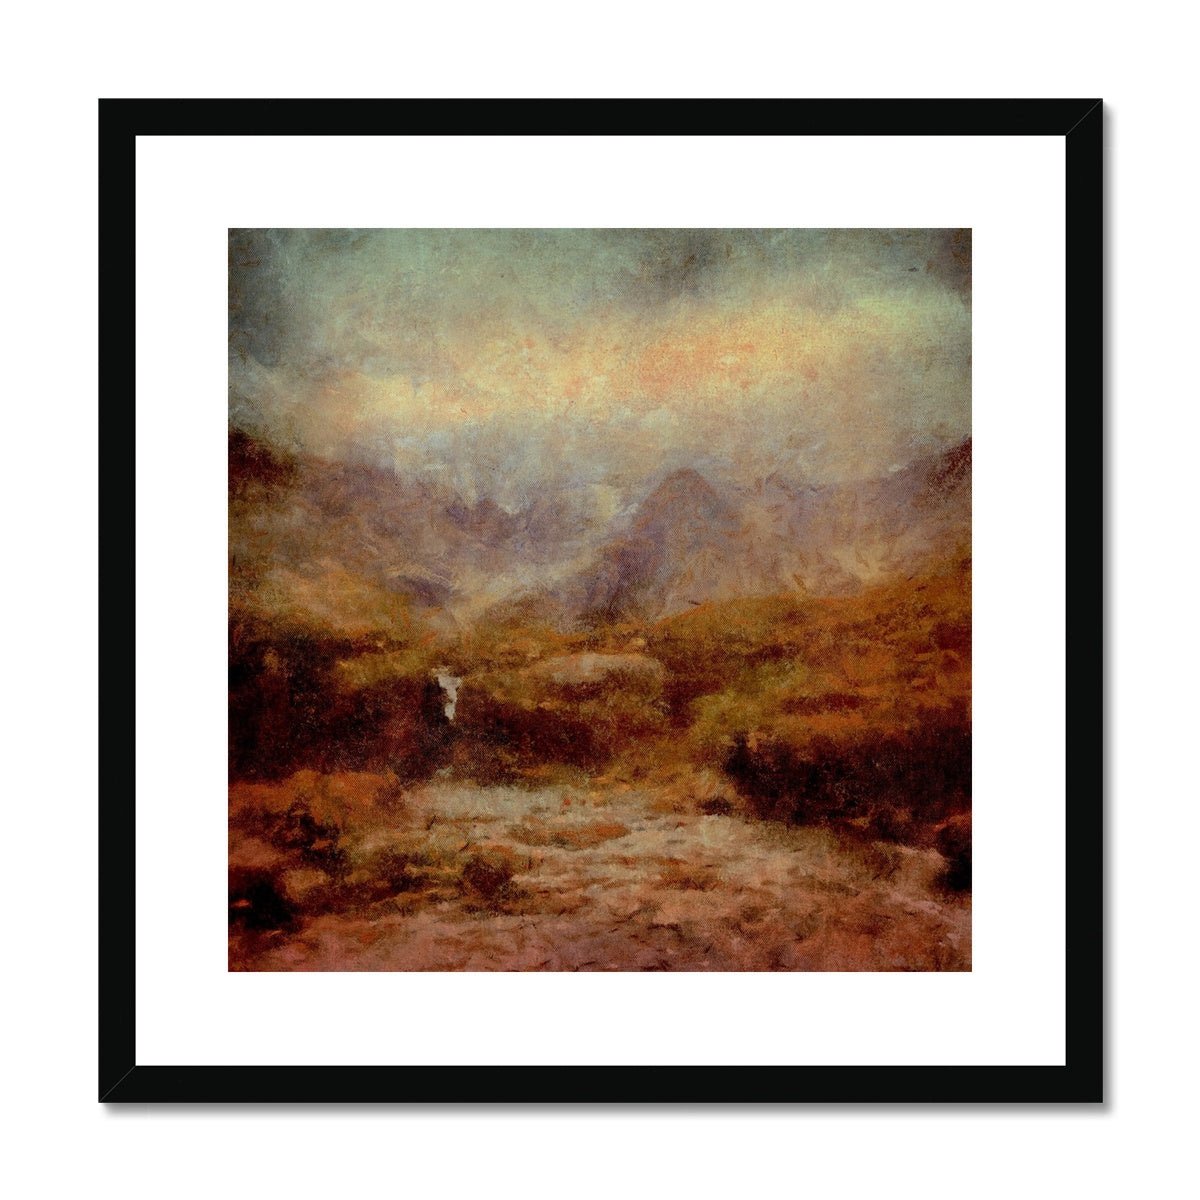 The Brooding Fairy Pools Skye Painting | Framed & Mounted Prints From Scotland-Framed & Mounted Prints-Skye Art Gallery-20"x20"-Black Frame-Paintings, Prints, Homeware, Art Gifts From Scotland By Scottish Artist Kevin Hunter